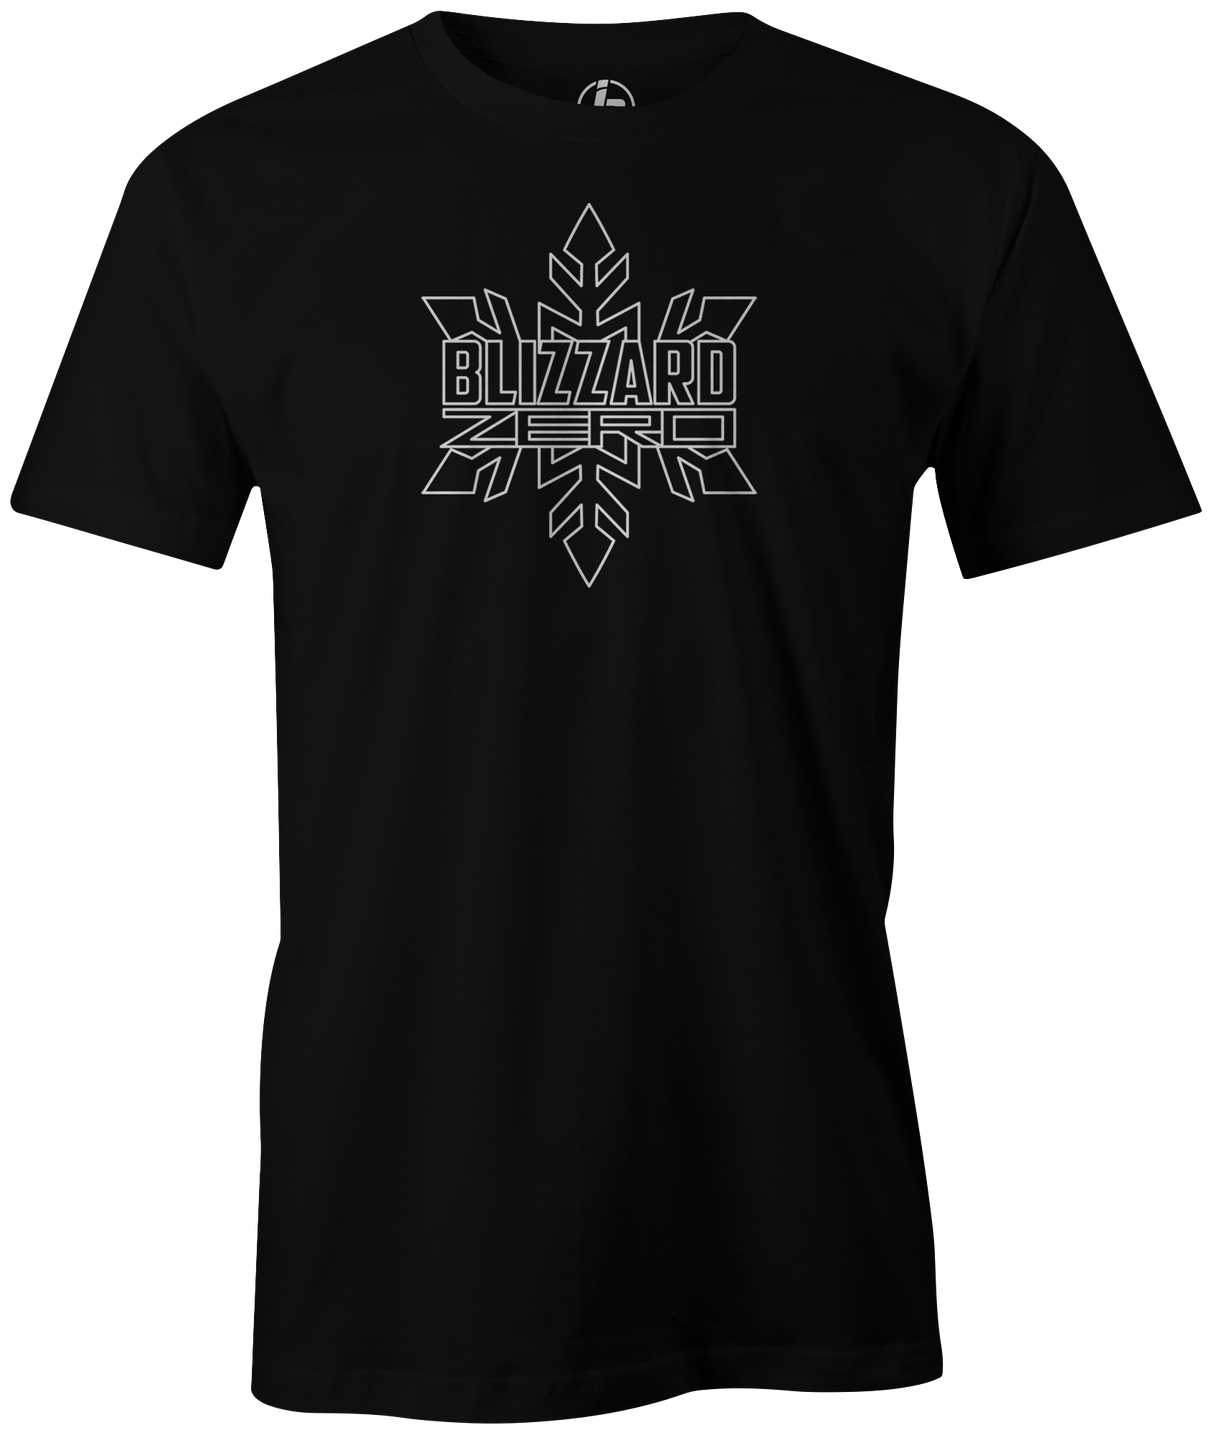 Blizzard Meltdown by Swag Bowling. Swag Bowling Classic Logo T-shirt. This shirt is perfect for bowling practice, leagues or weekend tournaments. Men's T-Shirt, bowling ball, tee, tee shirt, tee-shirt, t shirt, t-shirt, tees, league, tournament shirt, PBA, PWBA, USBC. Charcoal, Black, Purple, Red